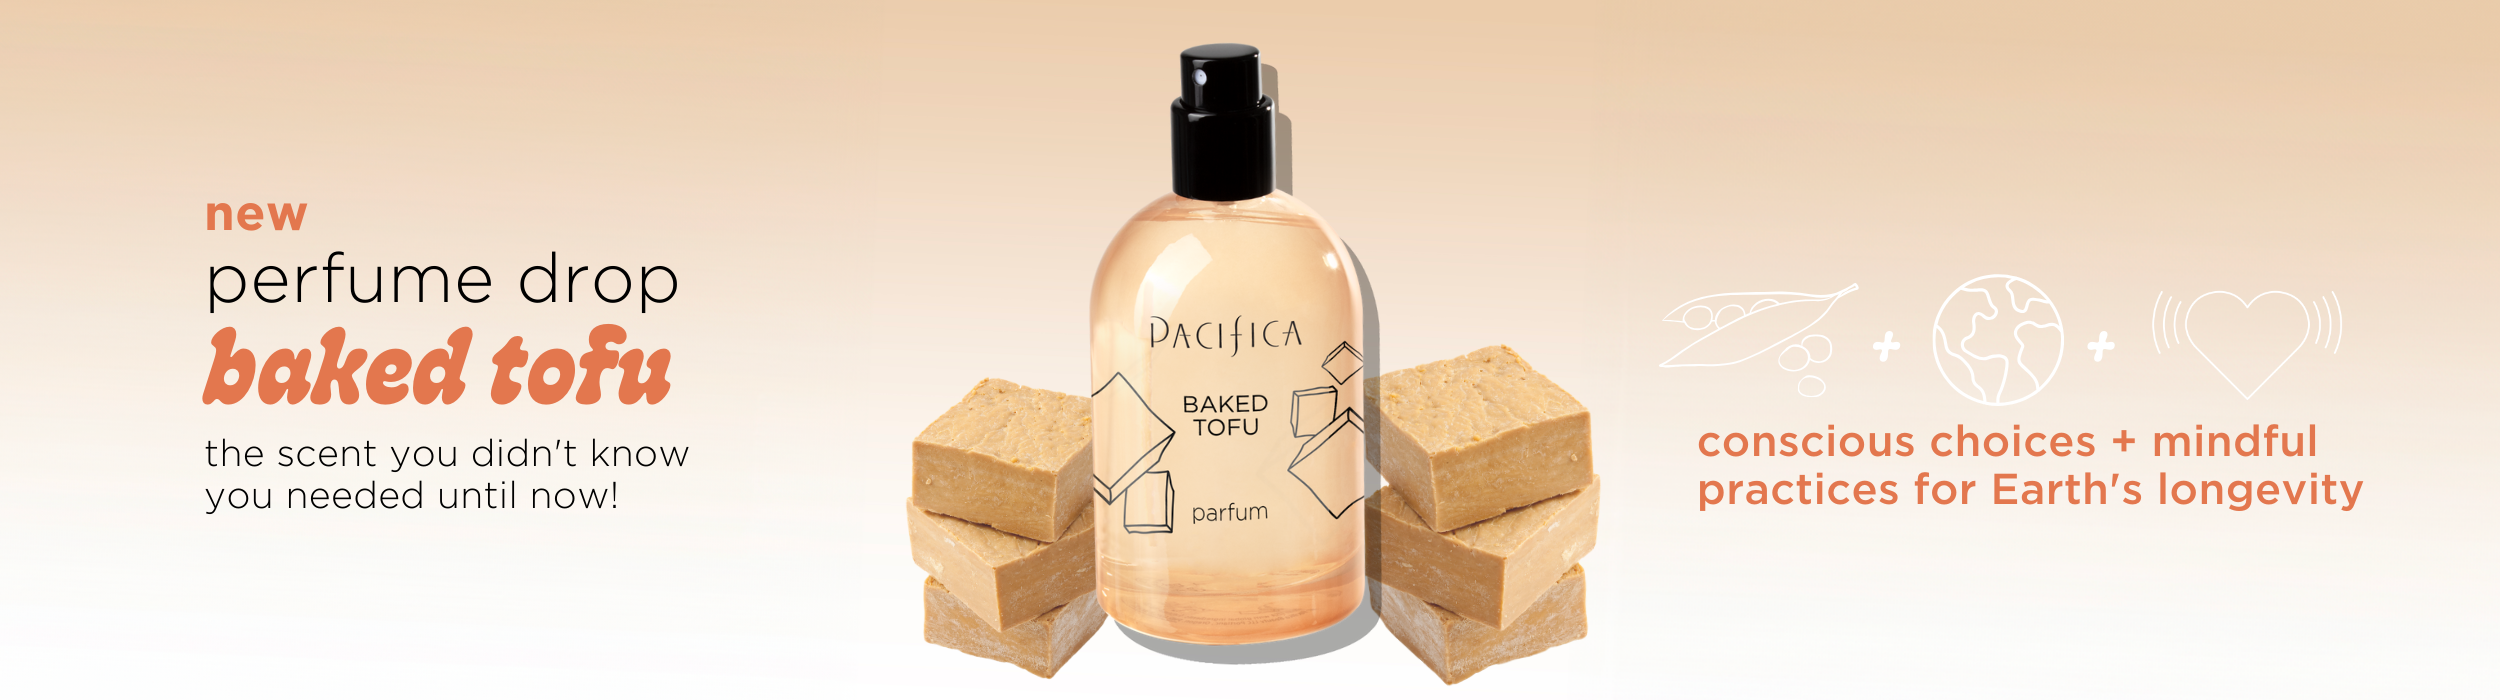 New Perfume! Baked Tofu Scent. The scent you didn't know you needed until now